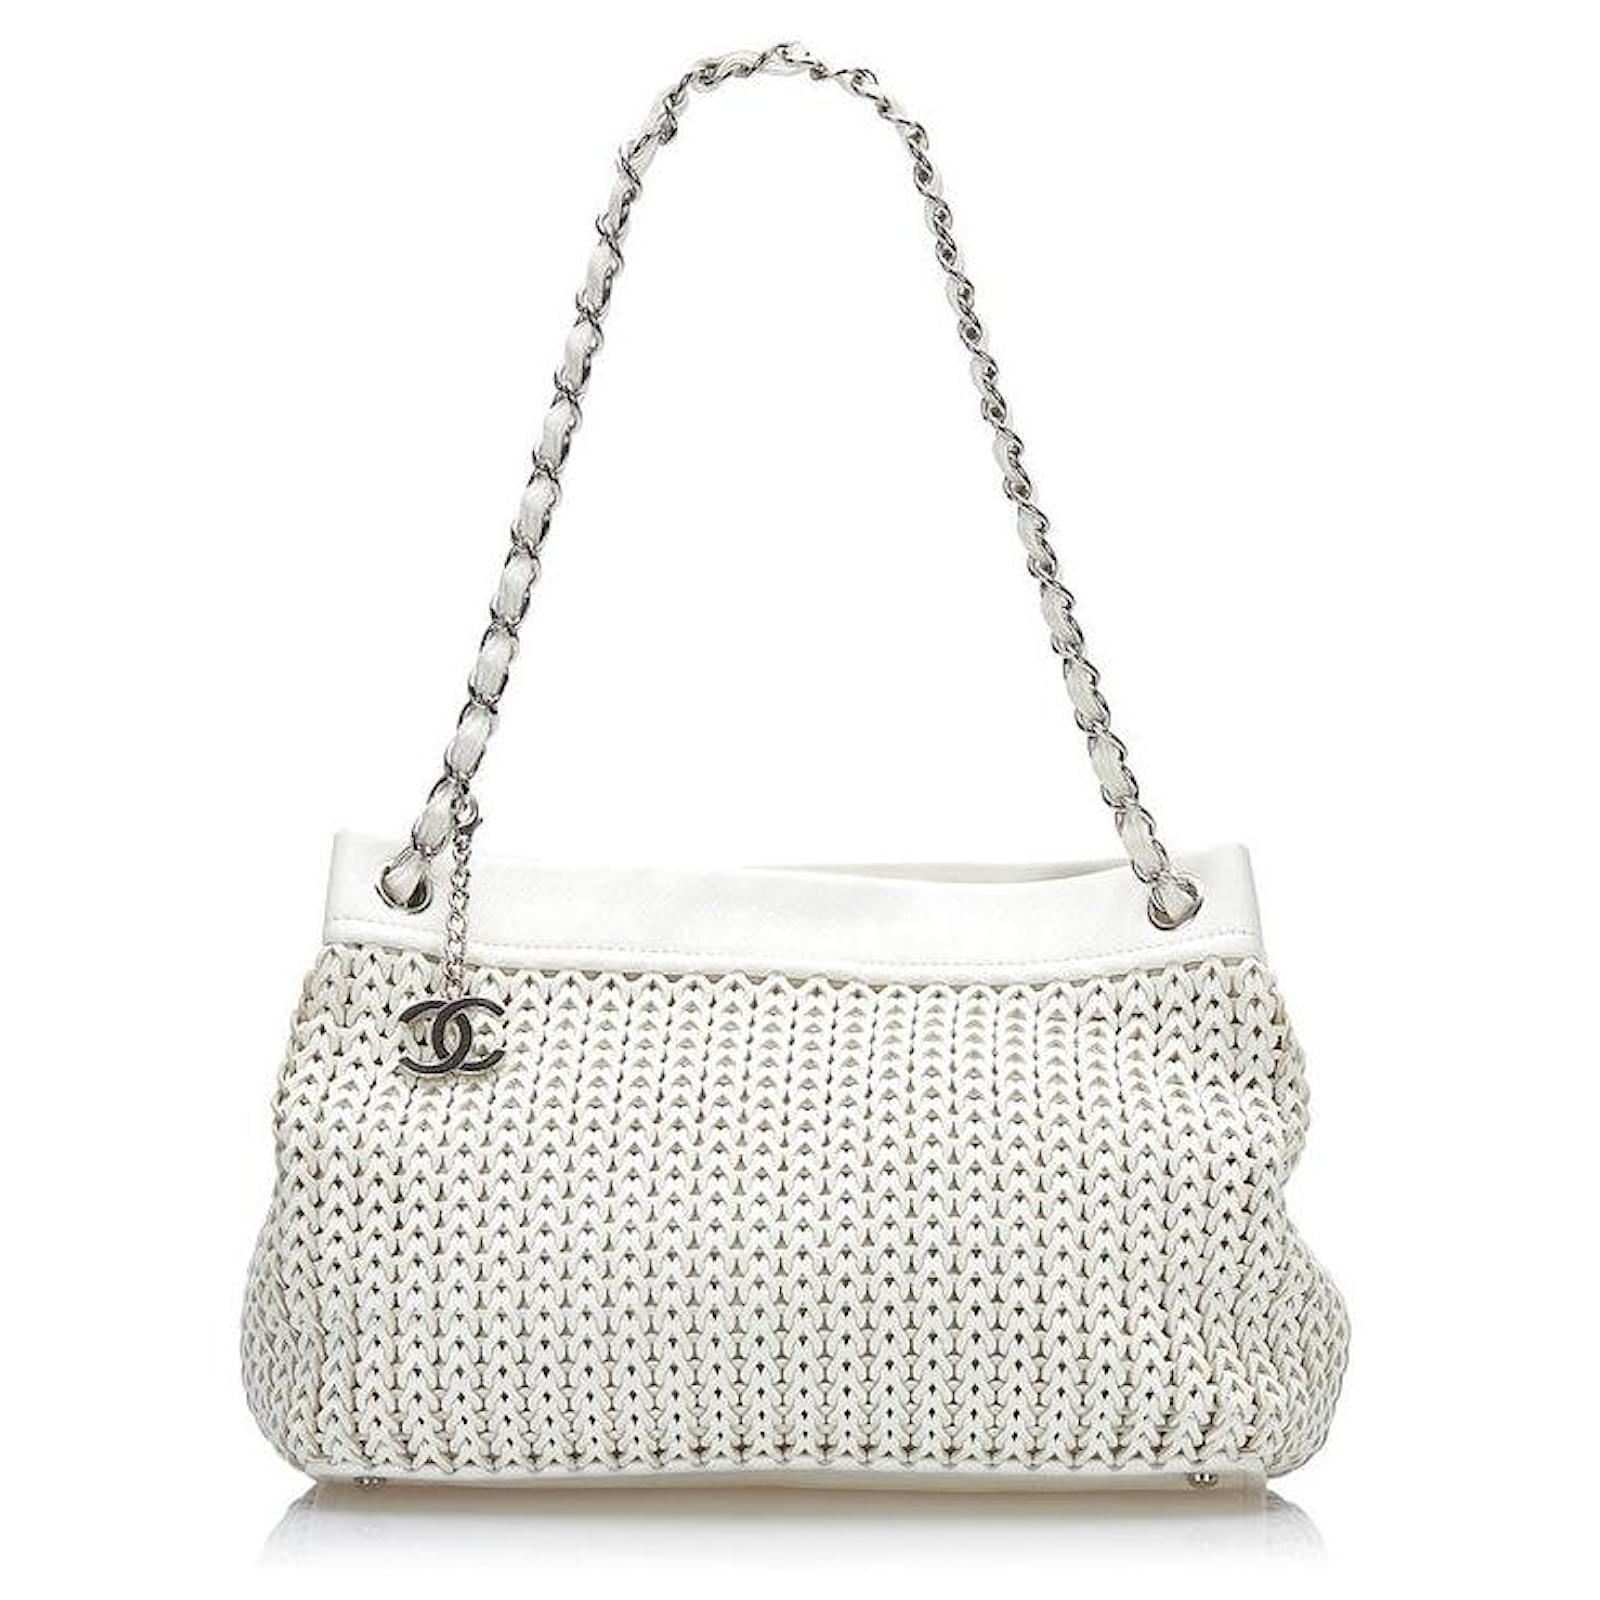 Chanel CC Woven Leather Chain Tote Bag White Pony-style calfskin